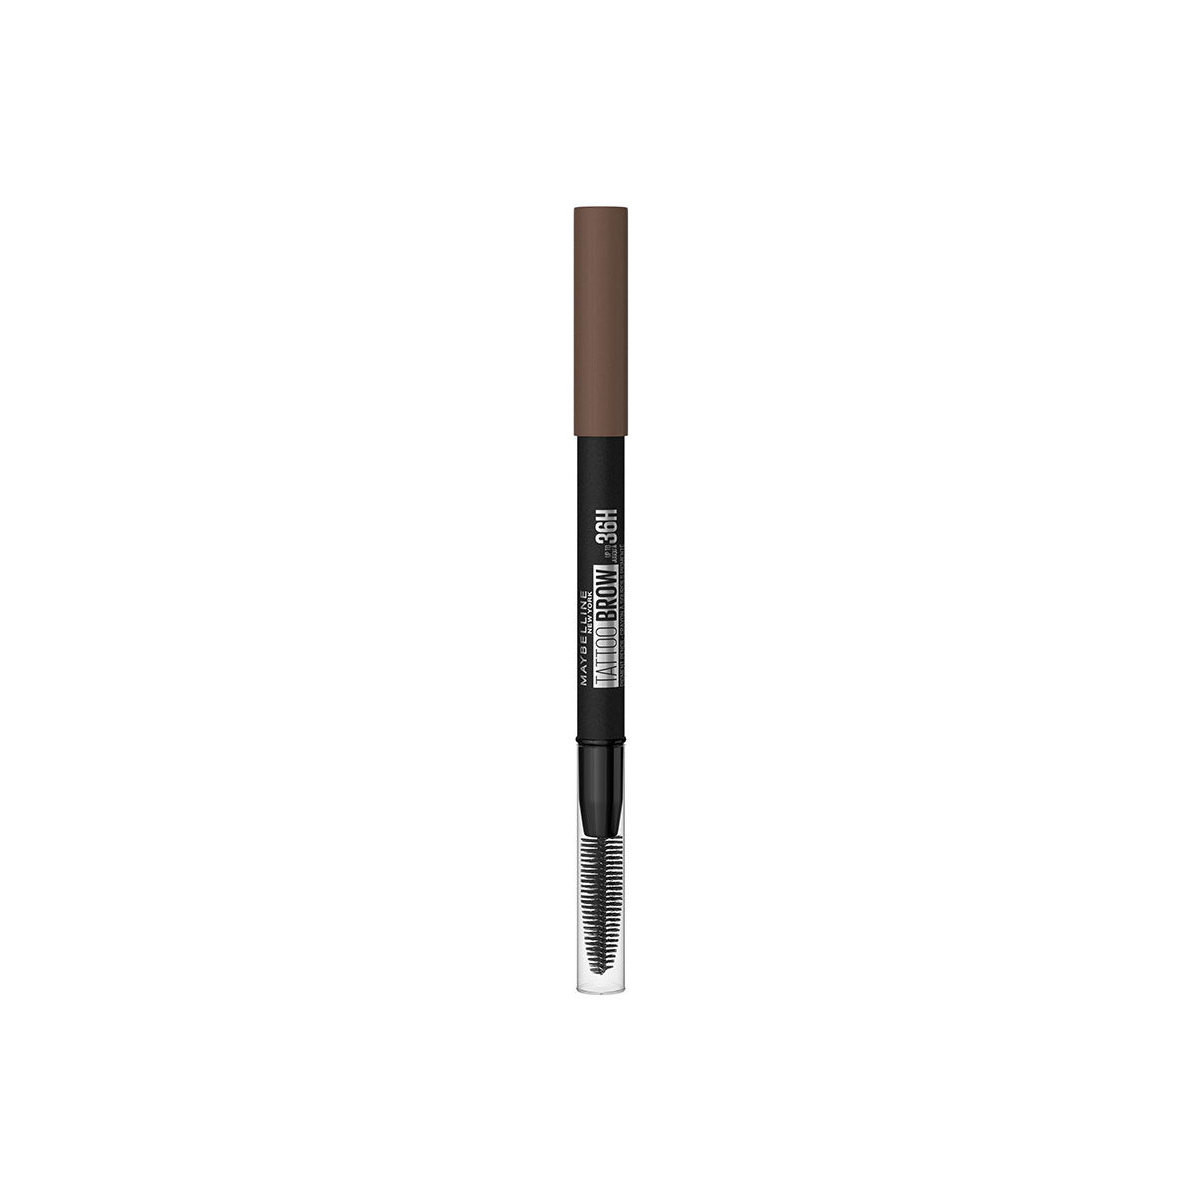 Belleza Mujer Perfiladores cejas Maybelline New York Tattoo Brow 36h 05-medium Brown 